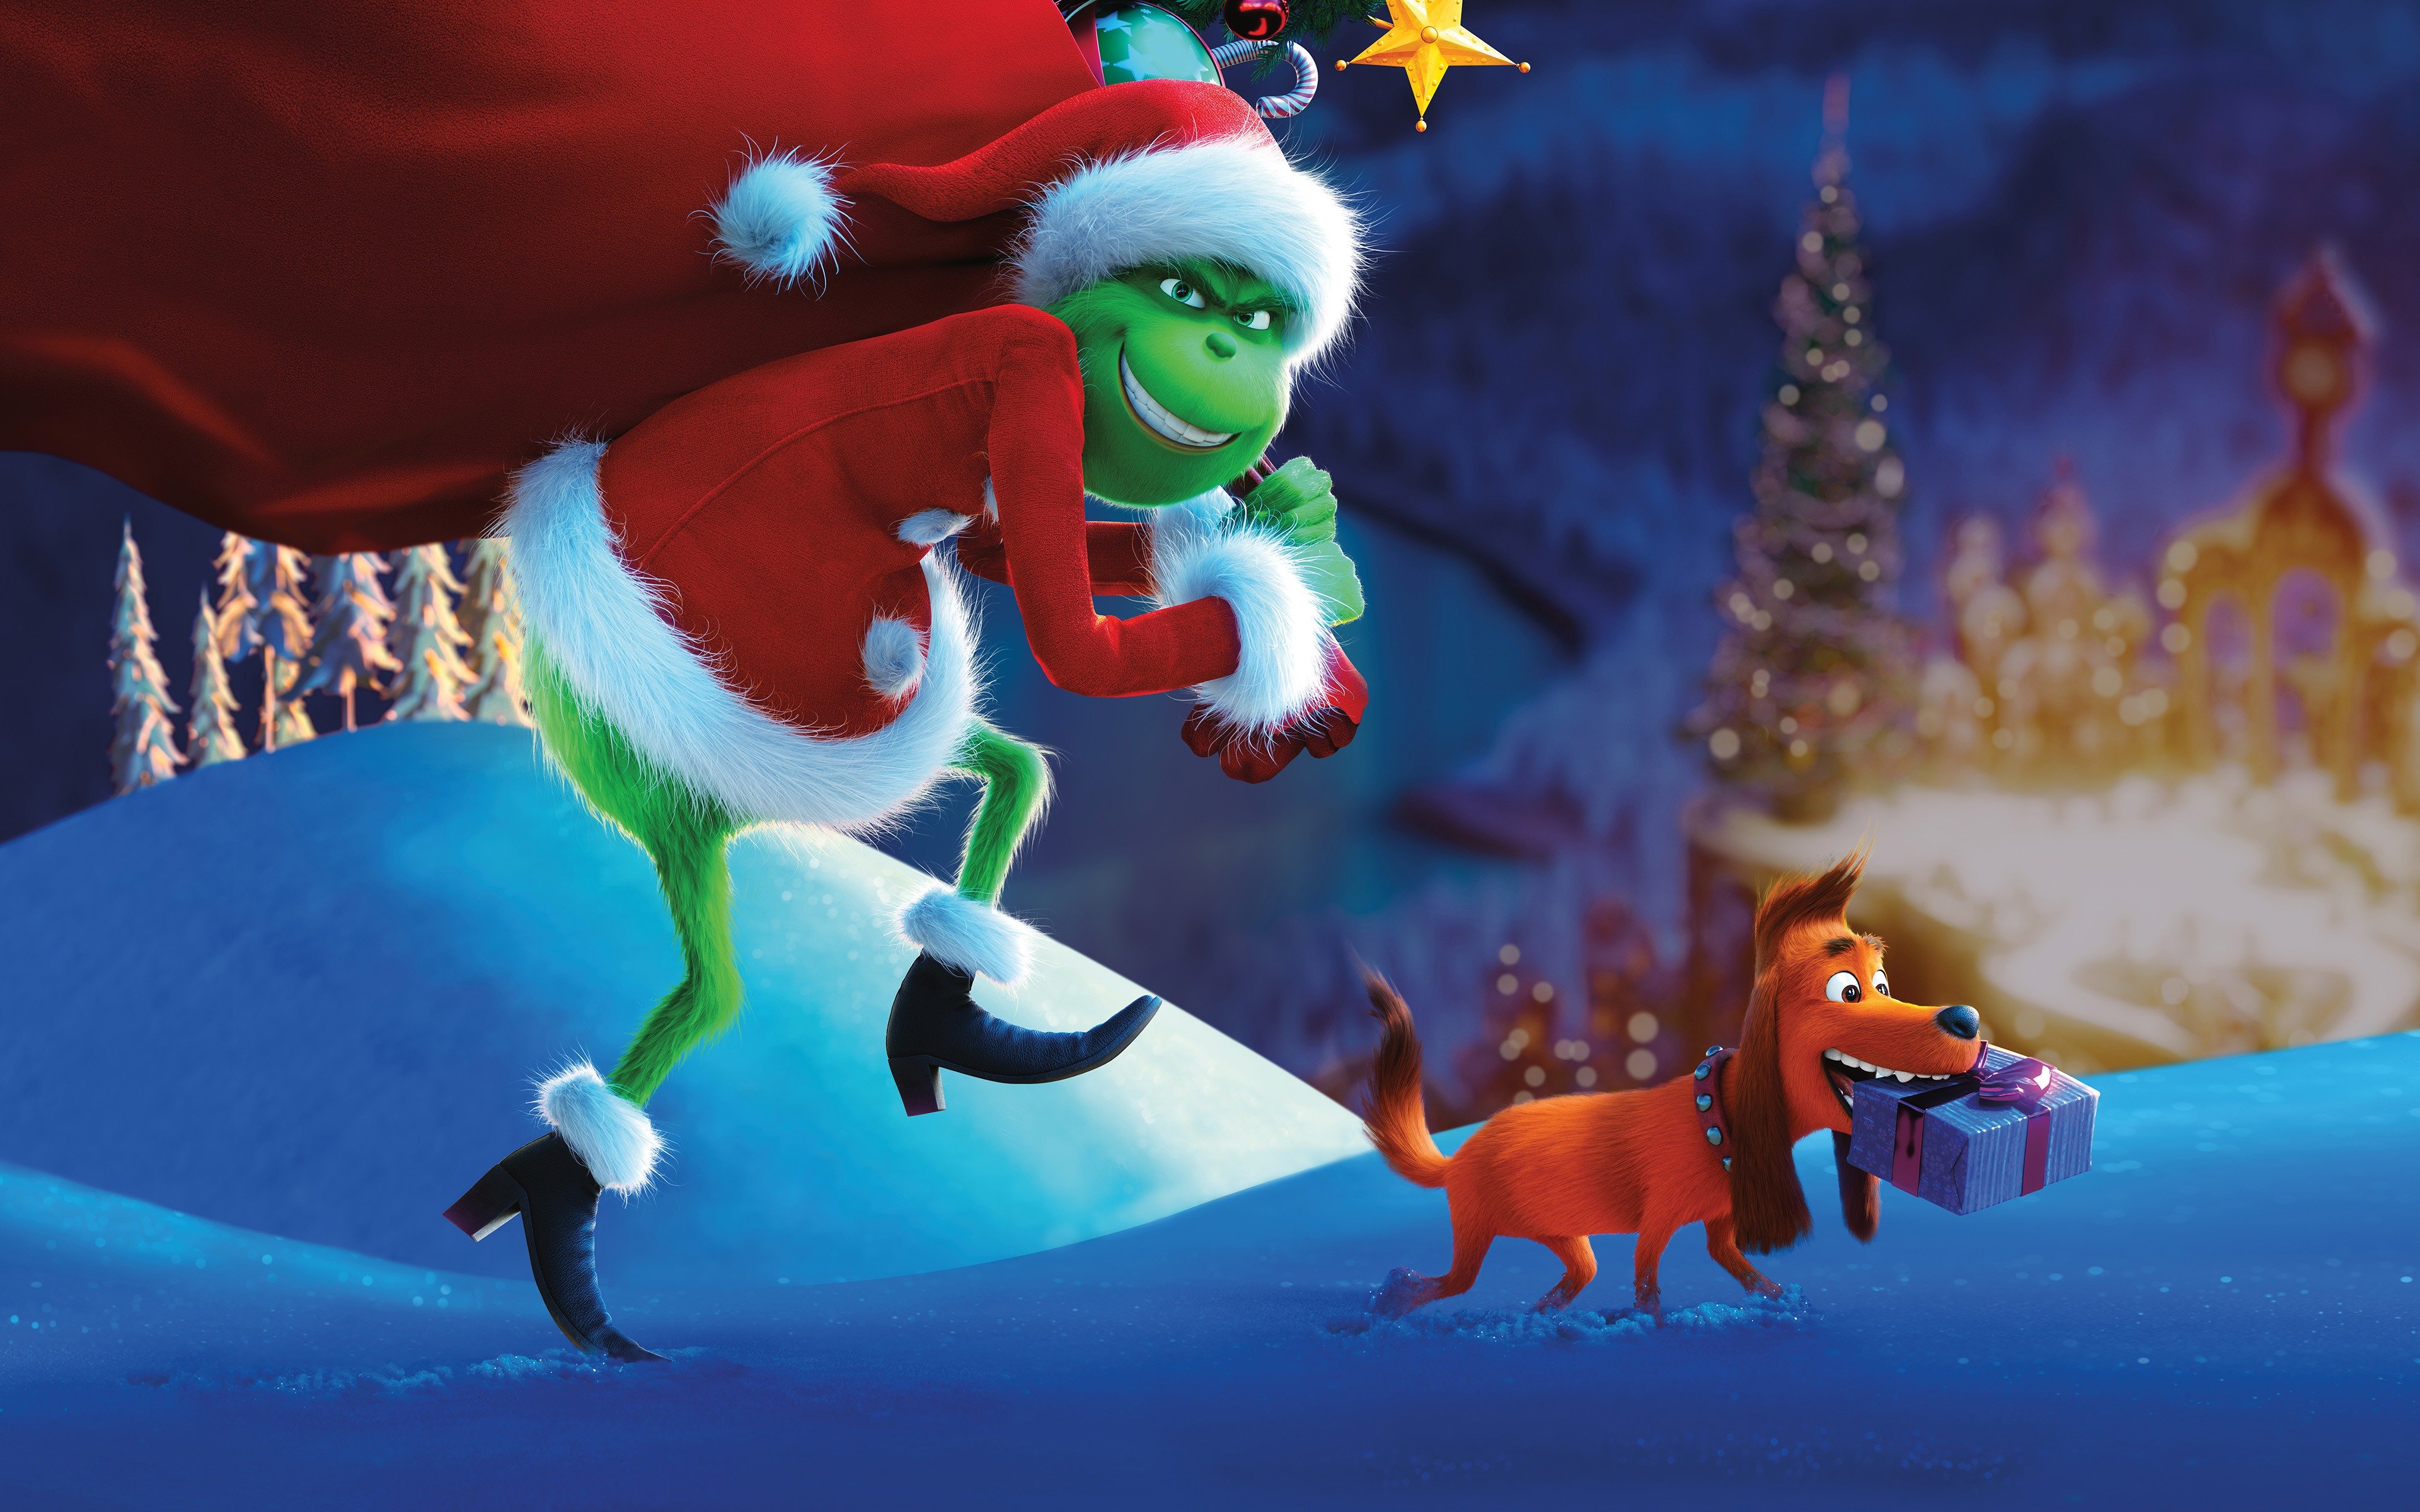 The Grinch 2018 New Animated Christmas Movie Wallpaper 4K